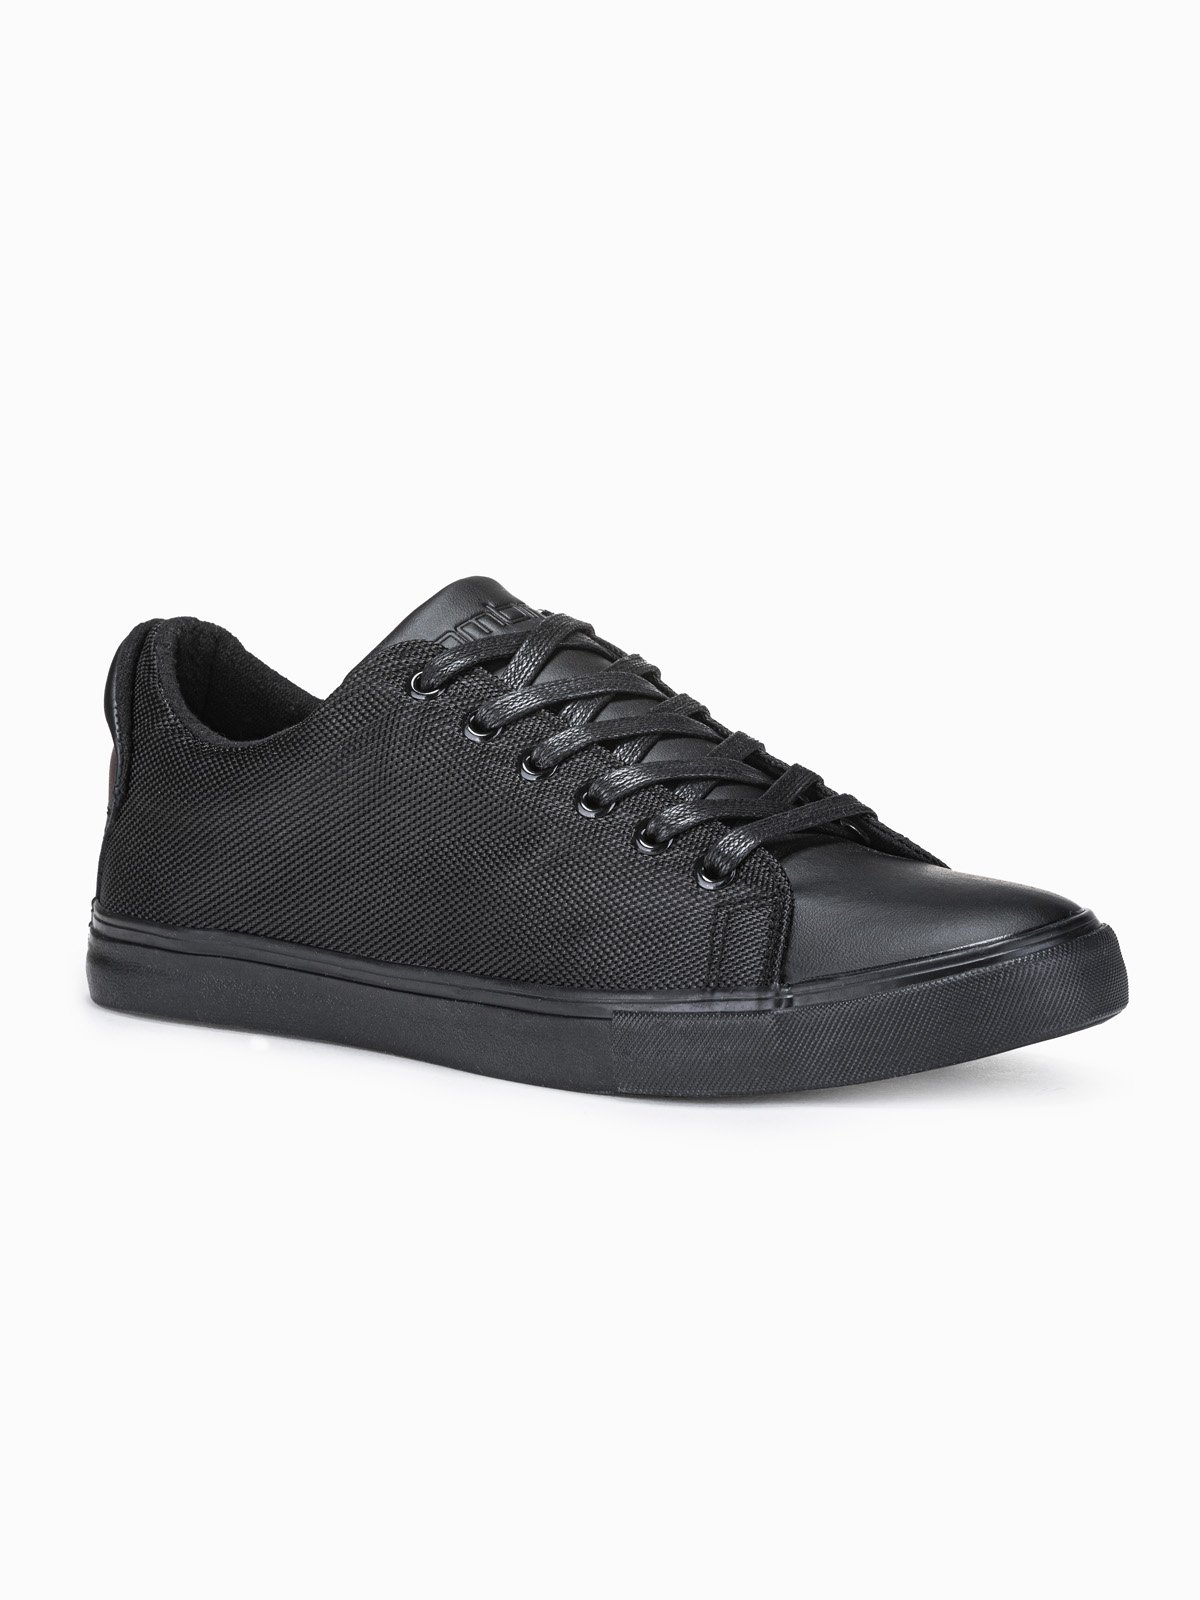 Levně Ombre BASIC men's shoes sneakers in combined materials - black